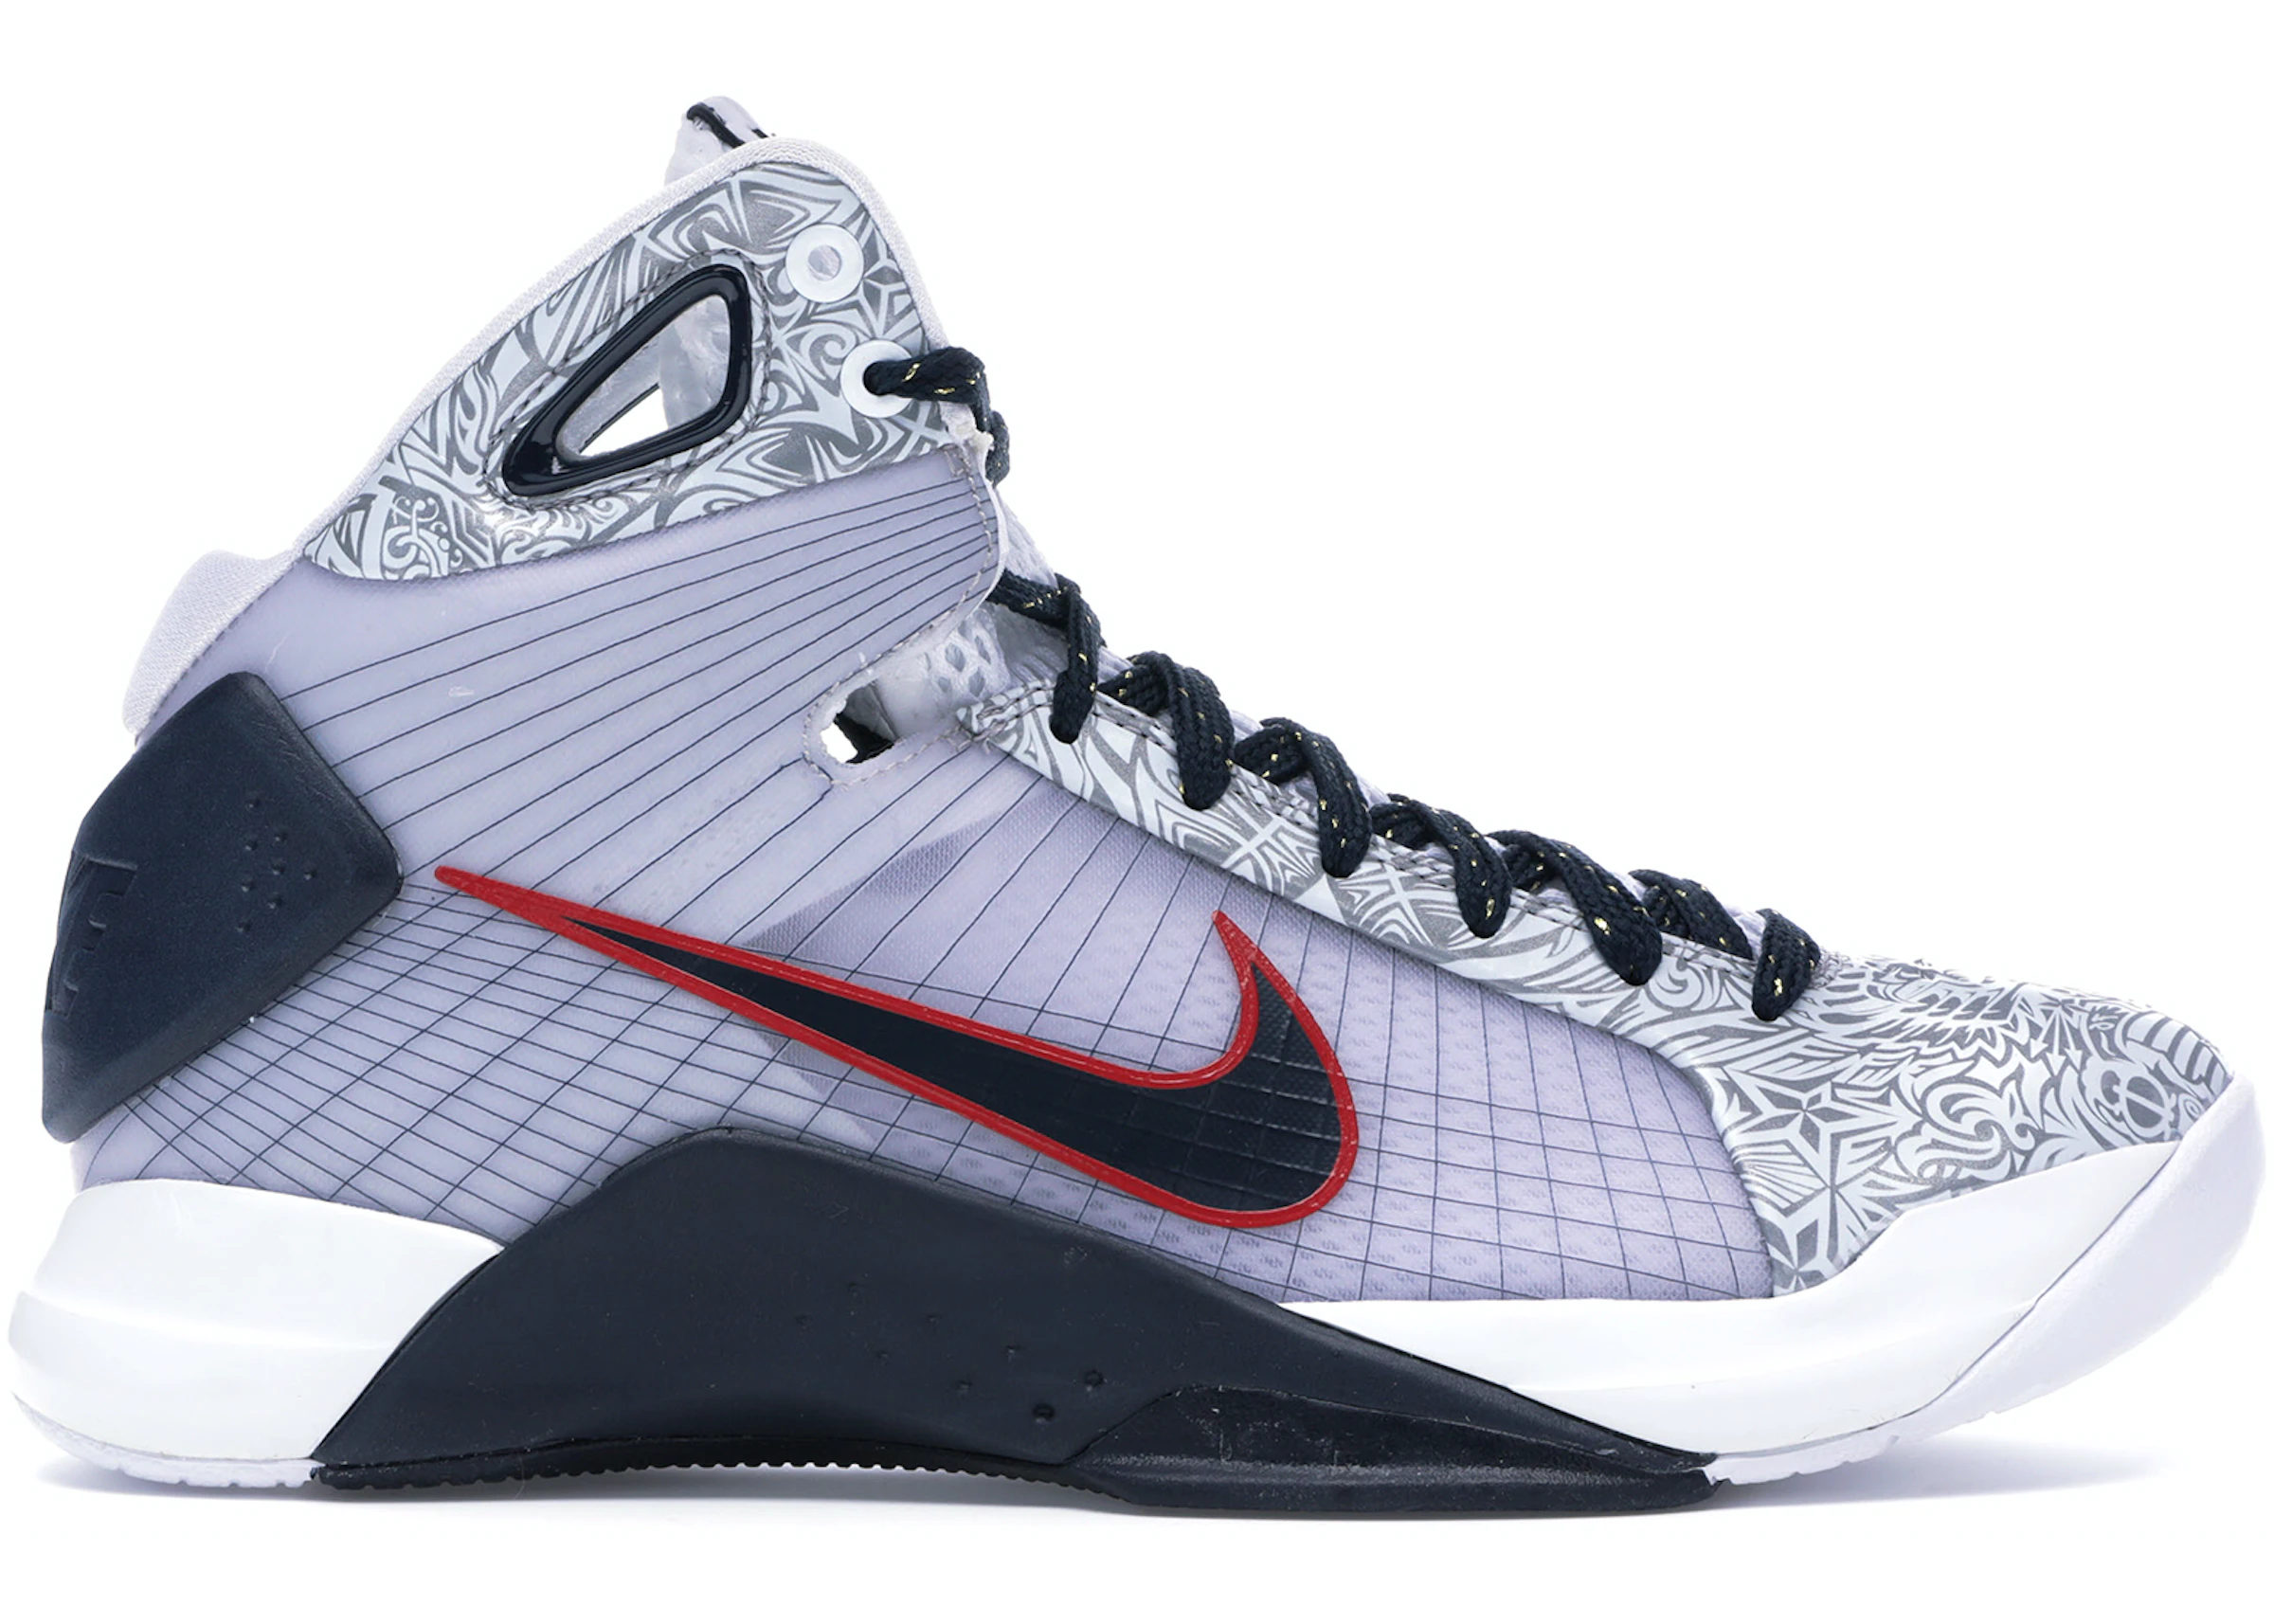 Circle Better Habitual nike hyperdunk sneakers expand gift Remarkable